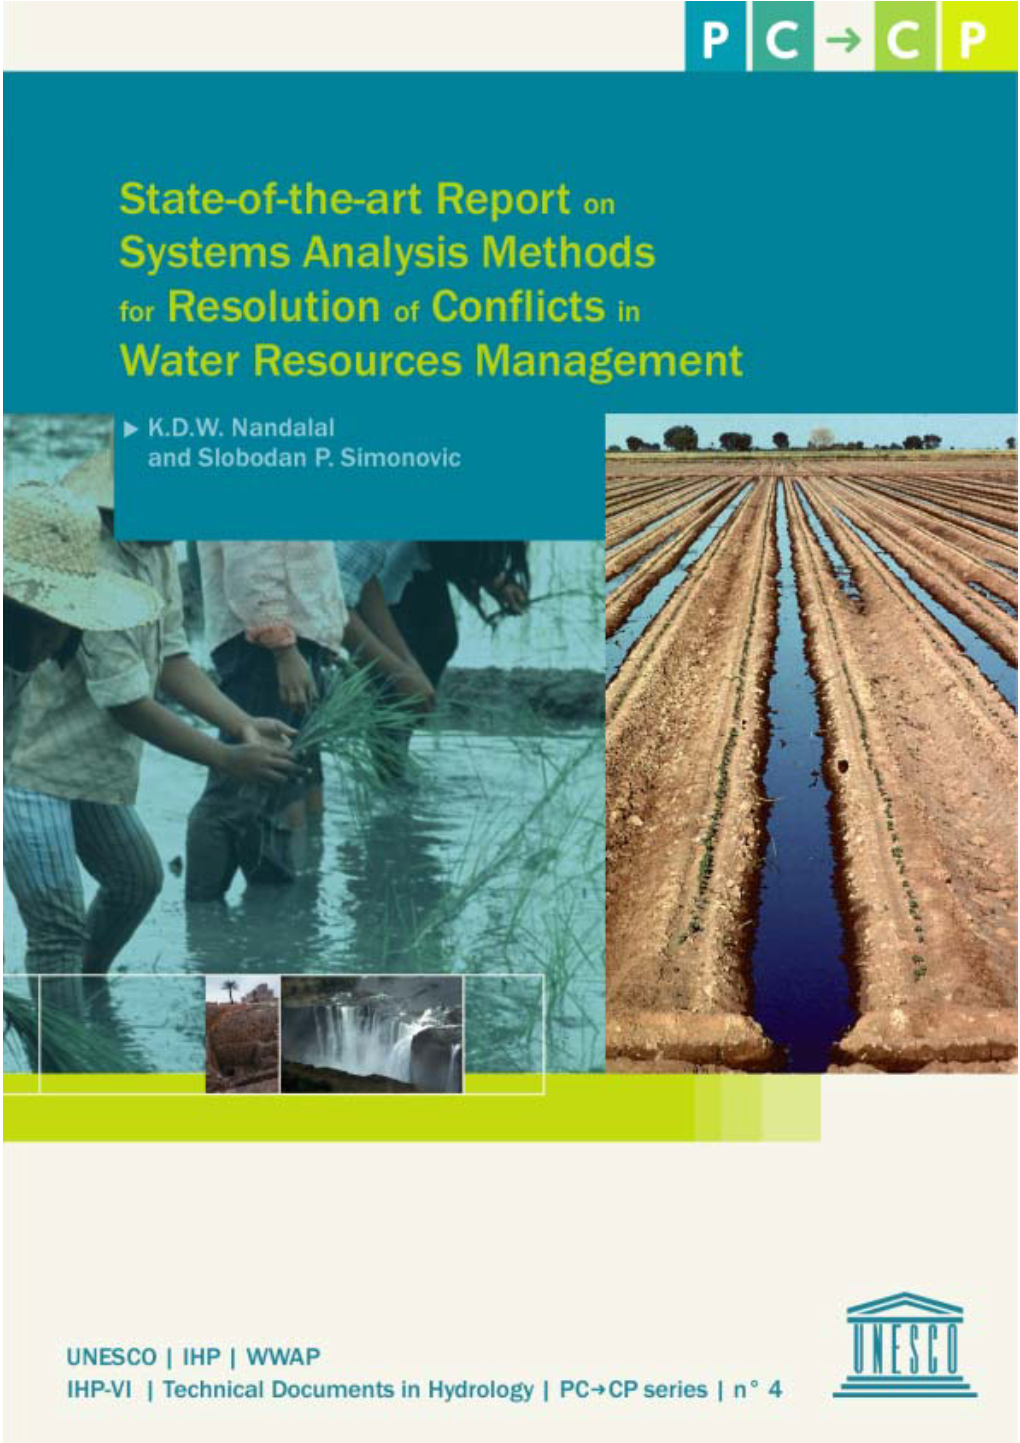 State-Of-The-Art Report on Systems Analysis Methods for Resolution of Conflicts in Water Resources Management